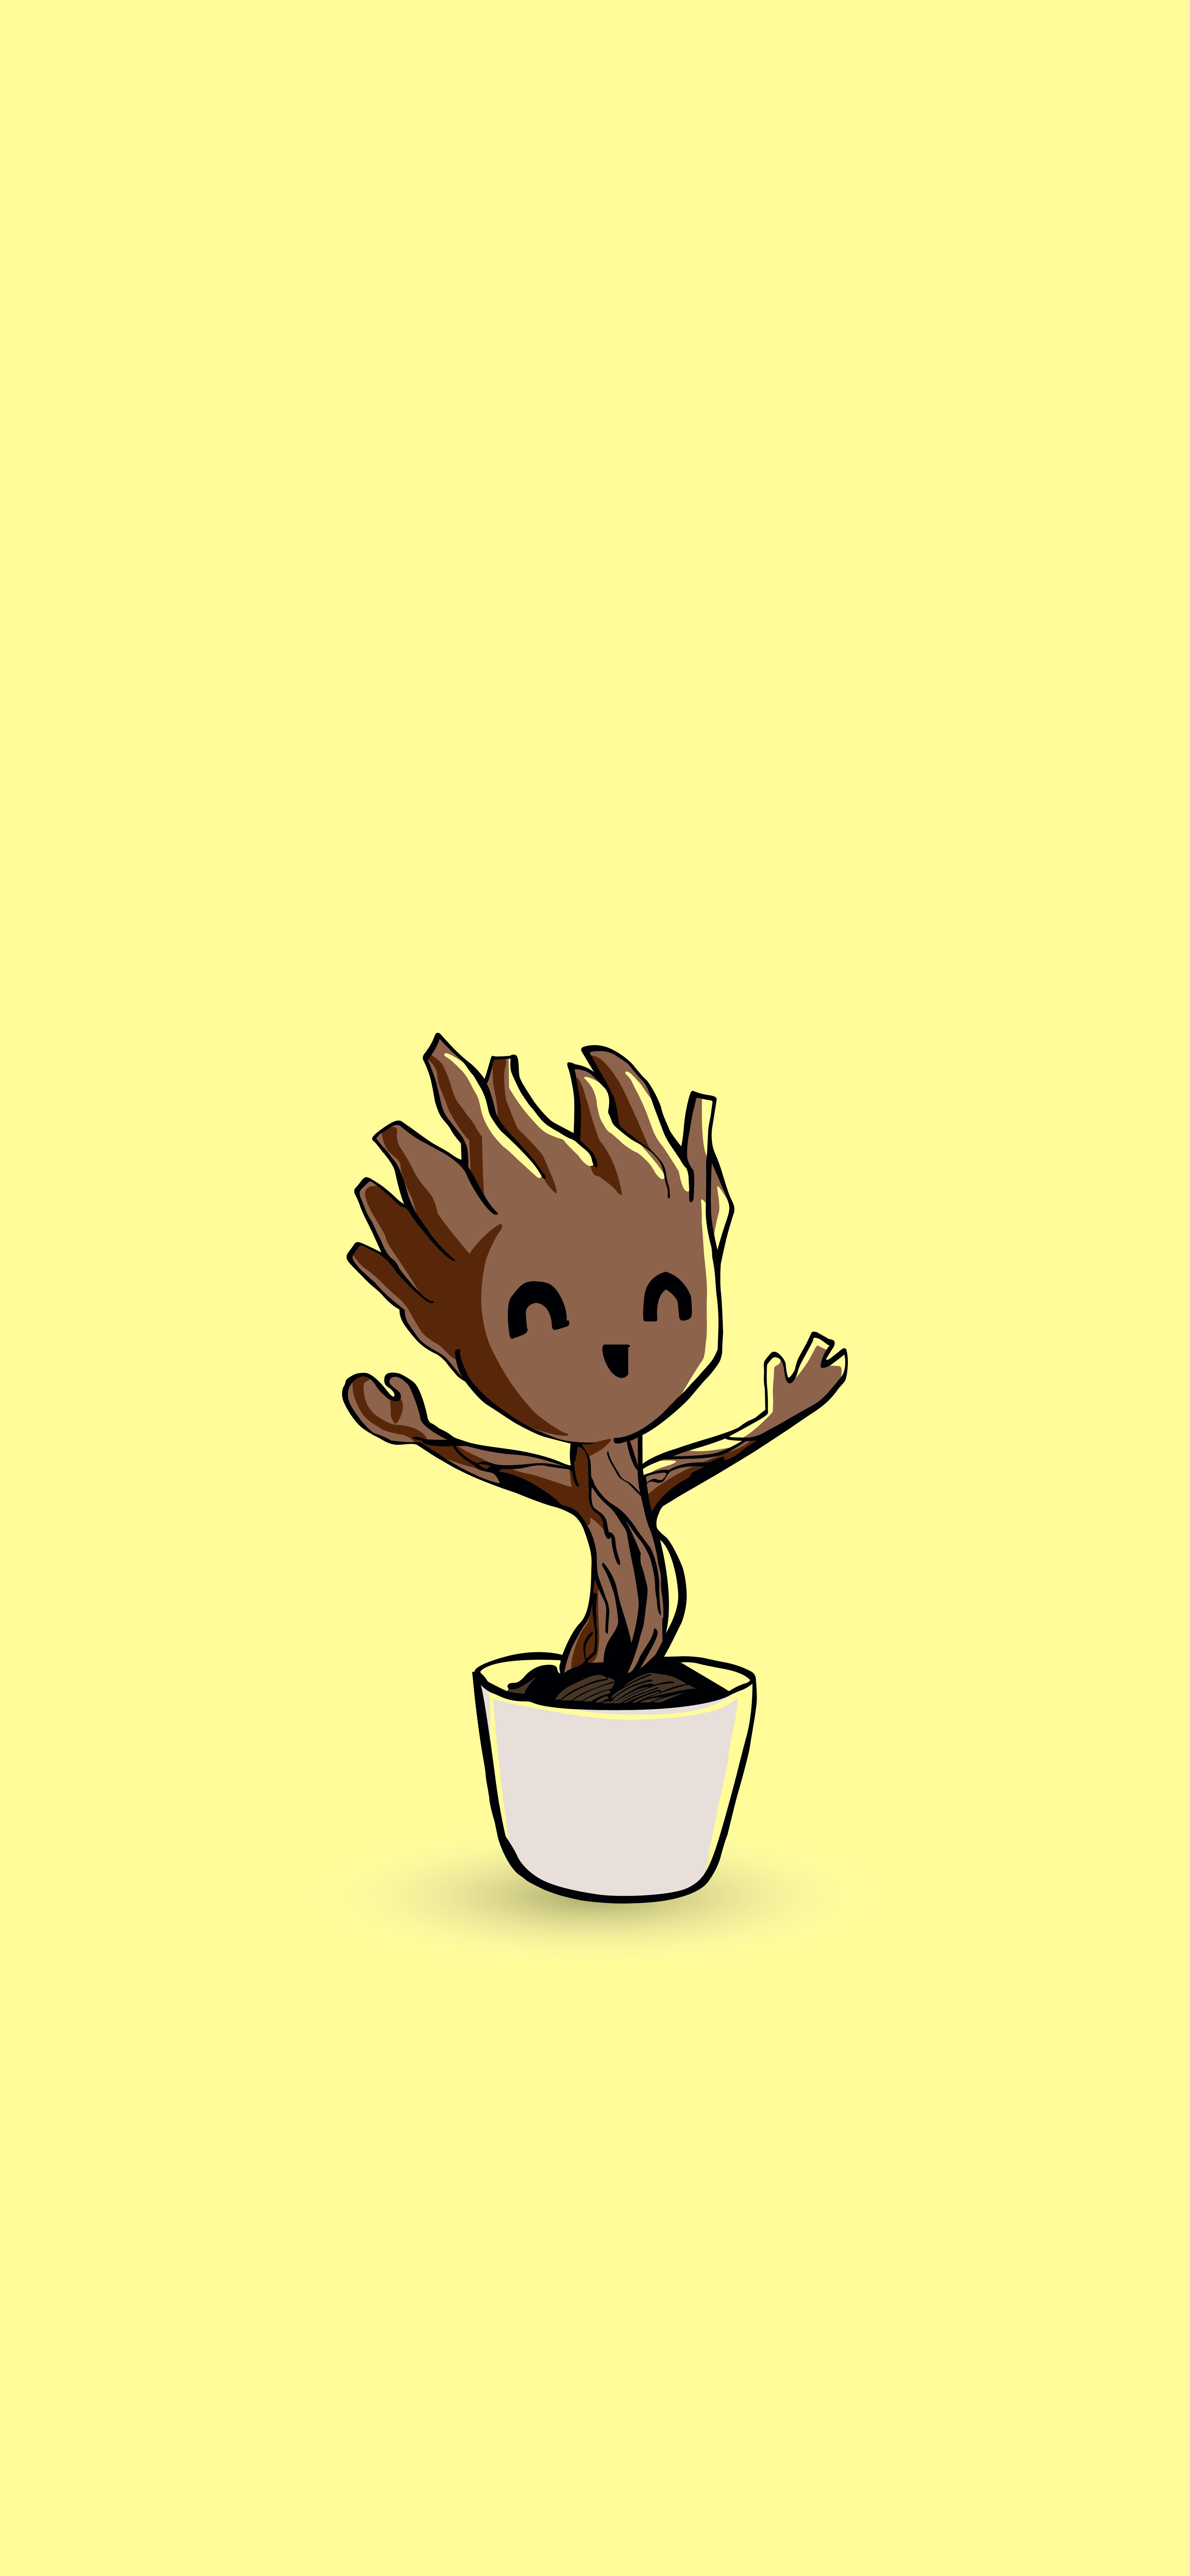 Baby Groot Ultra HD 4k Wallpaper for iPhone X. Superhero wallpaper, Ultra HD 4k wallpaper, iPhone wallpaper